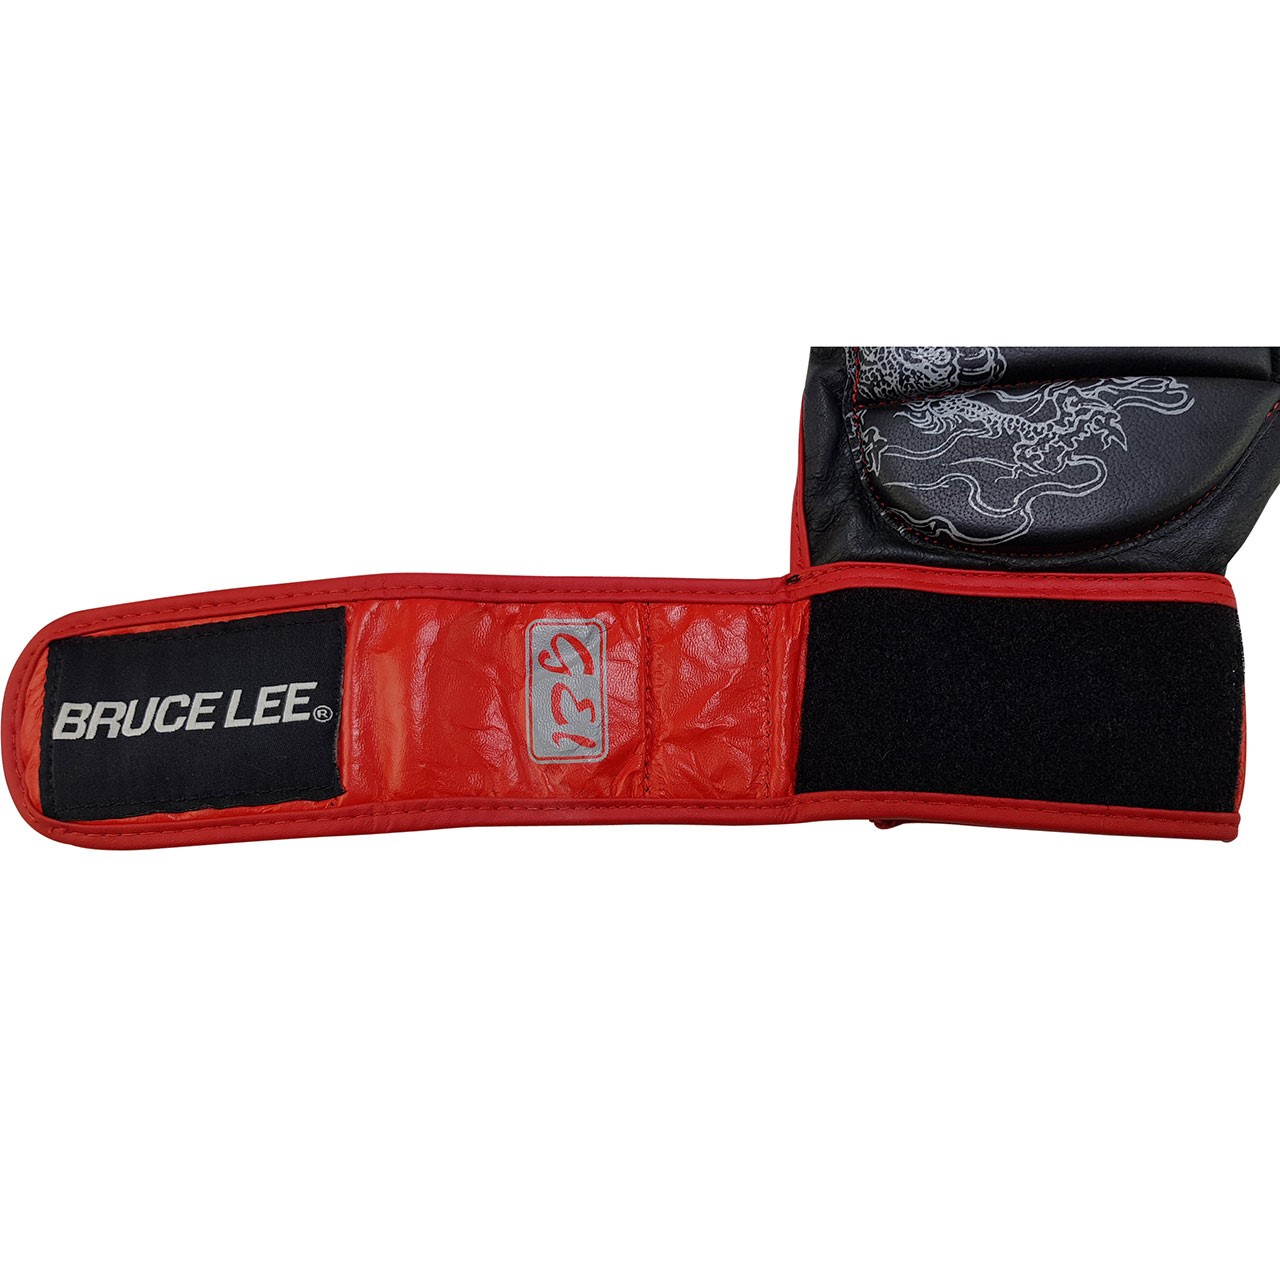 Bruce Lee Deluxe Grappling Gloves